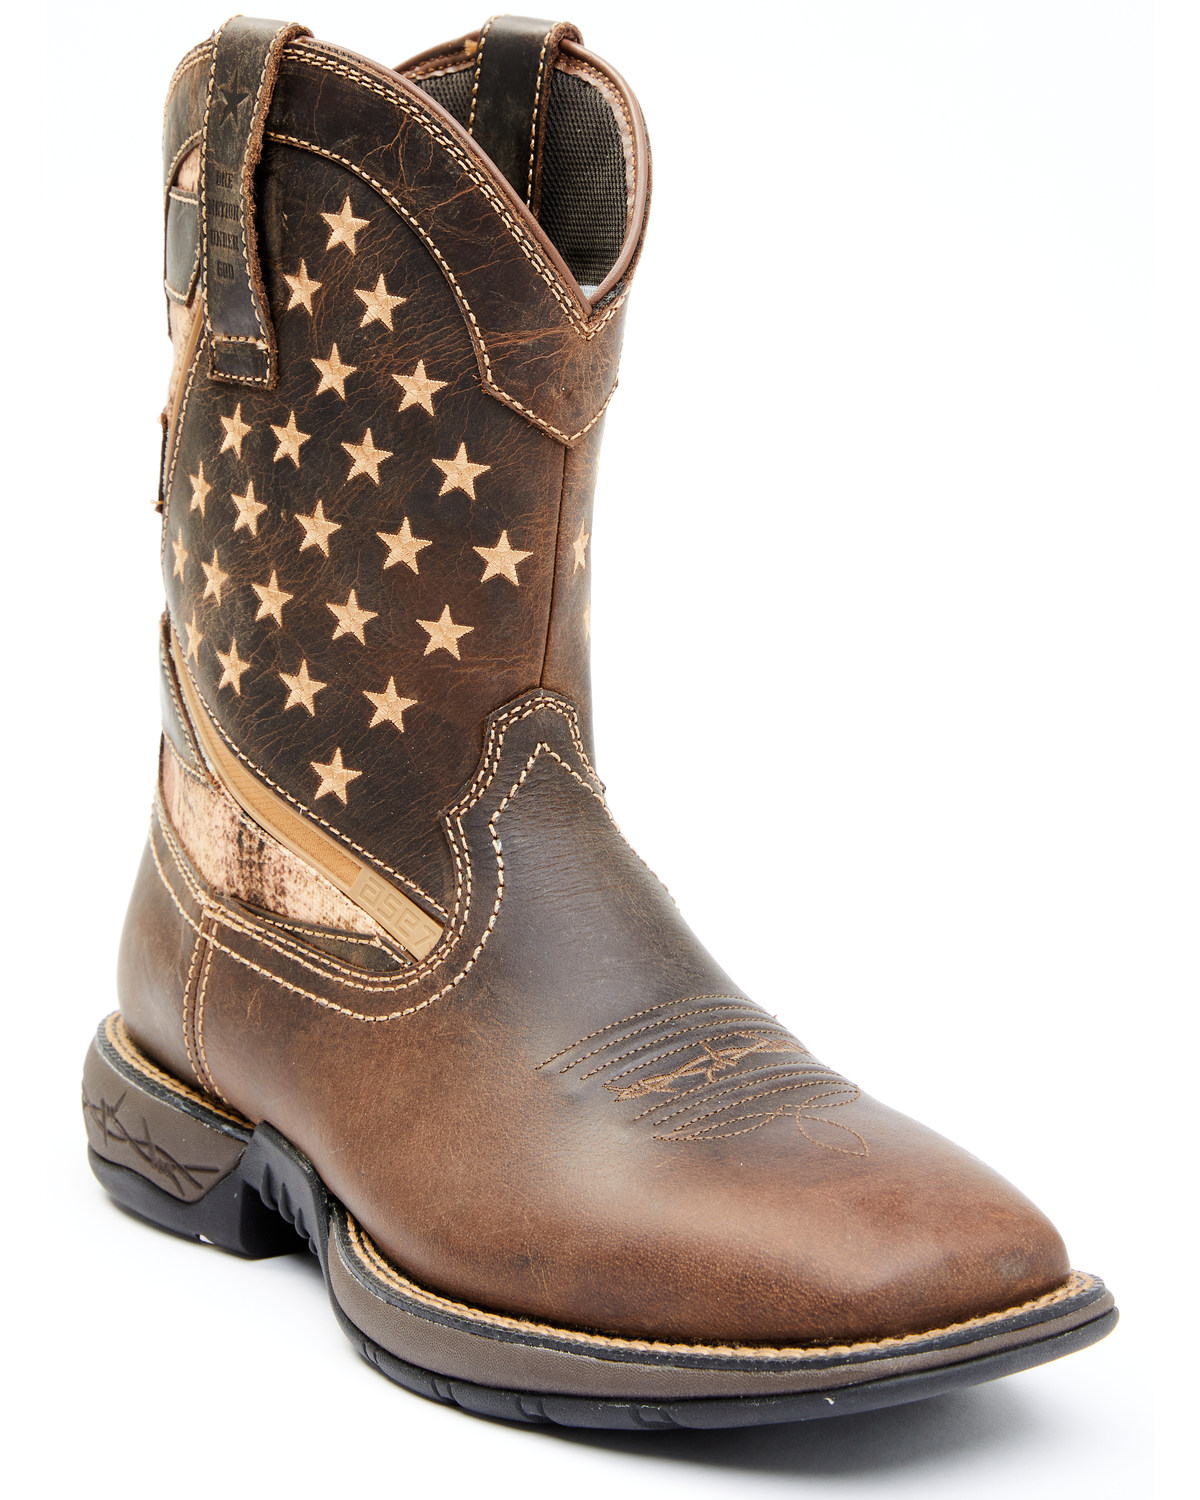 Cody James Men's Star Lite Performance Western Boots - Broad Square Toe